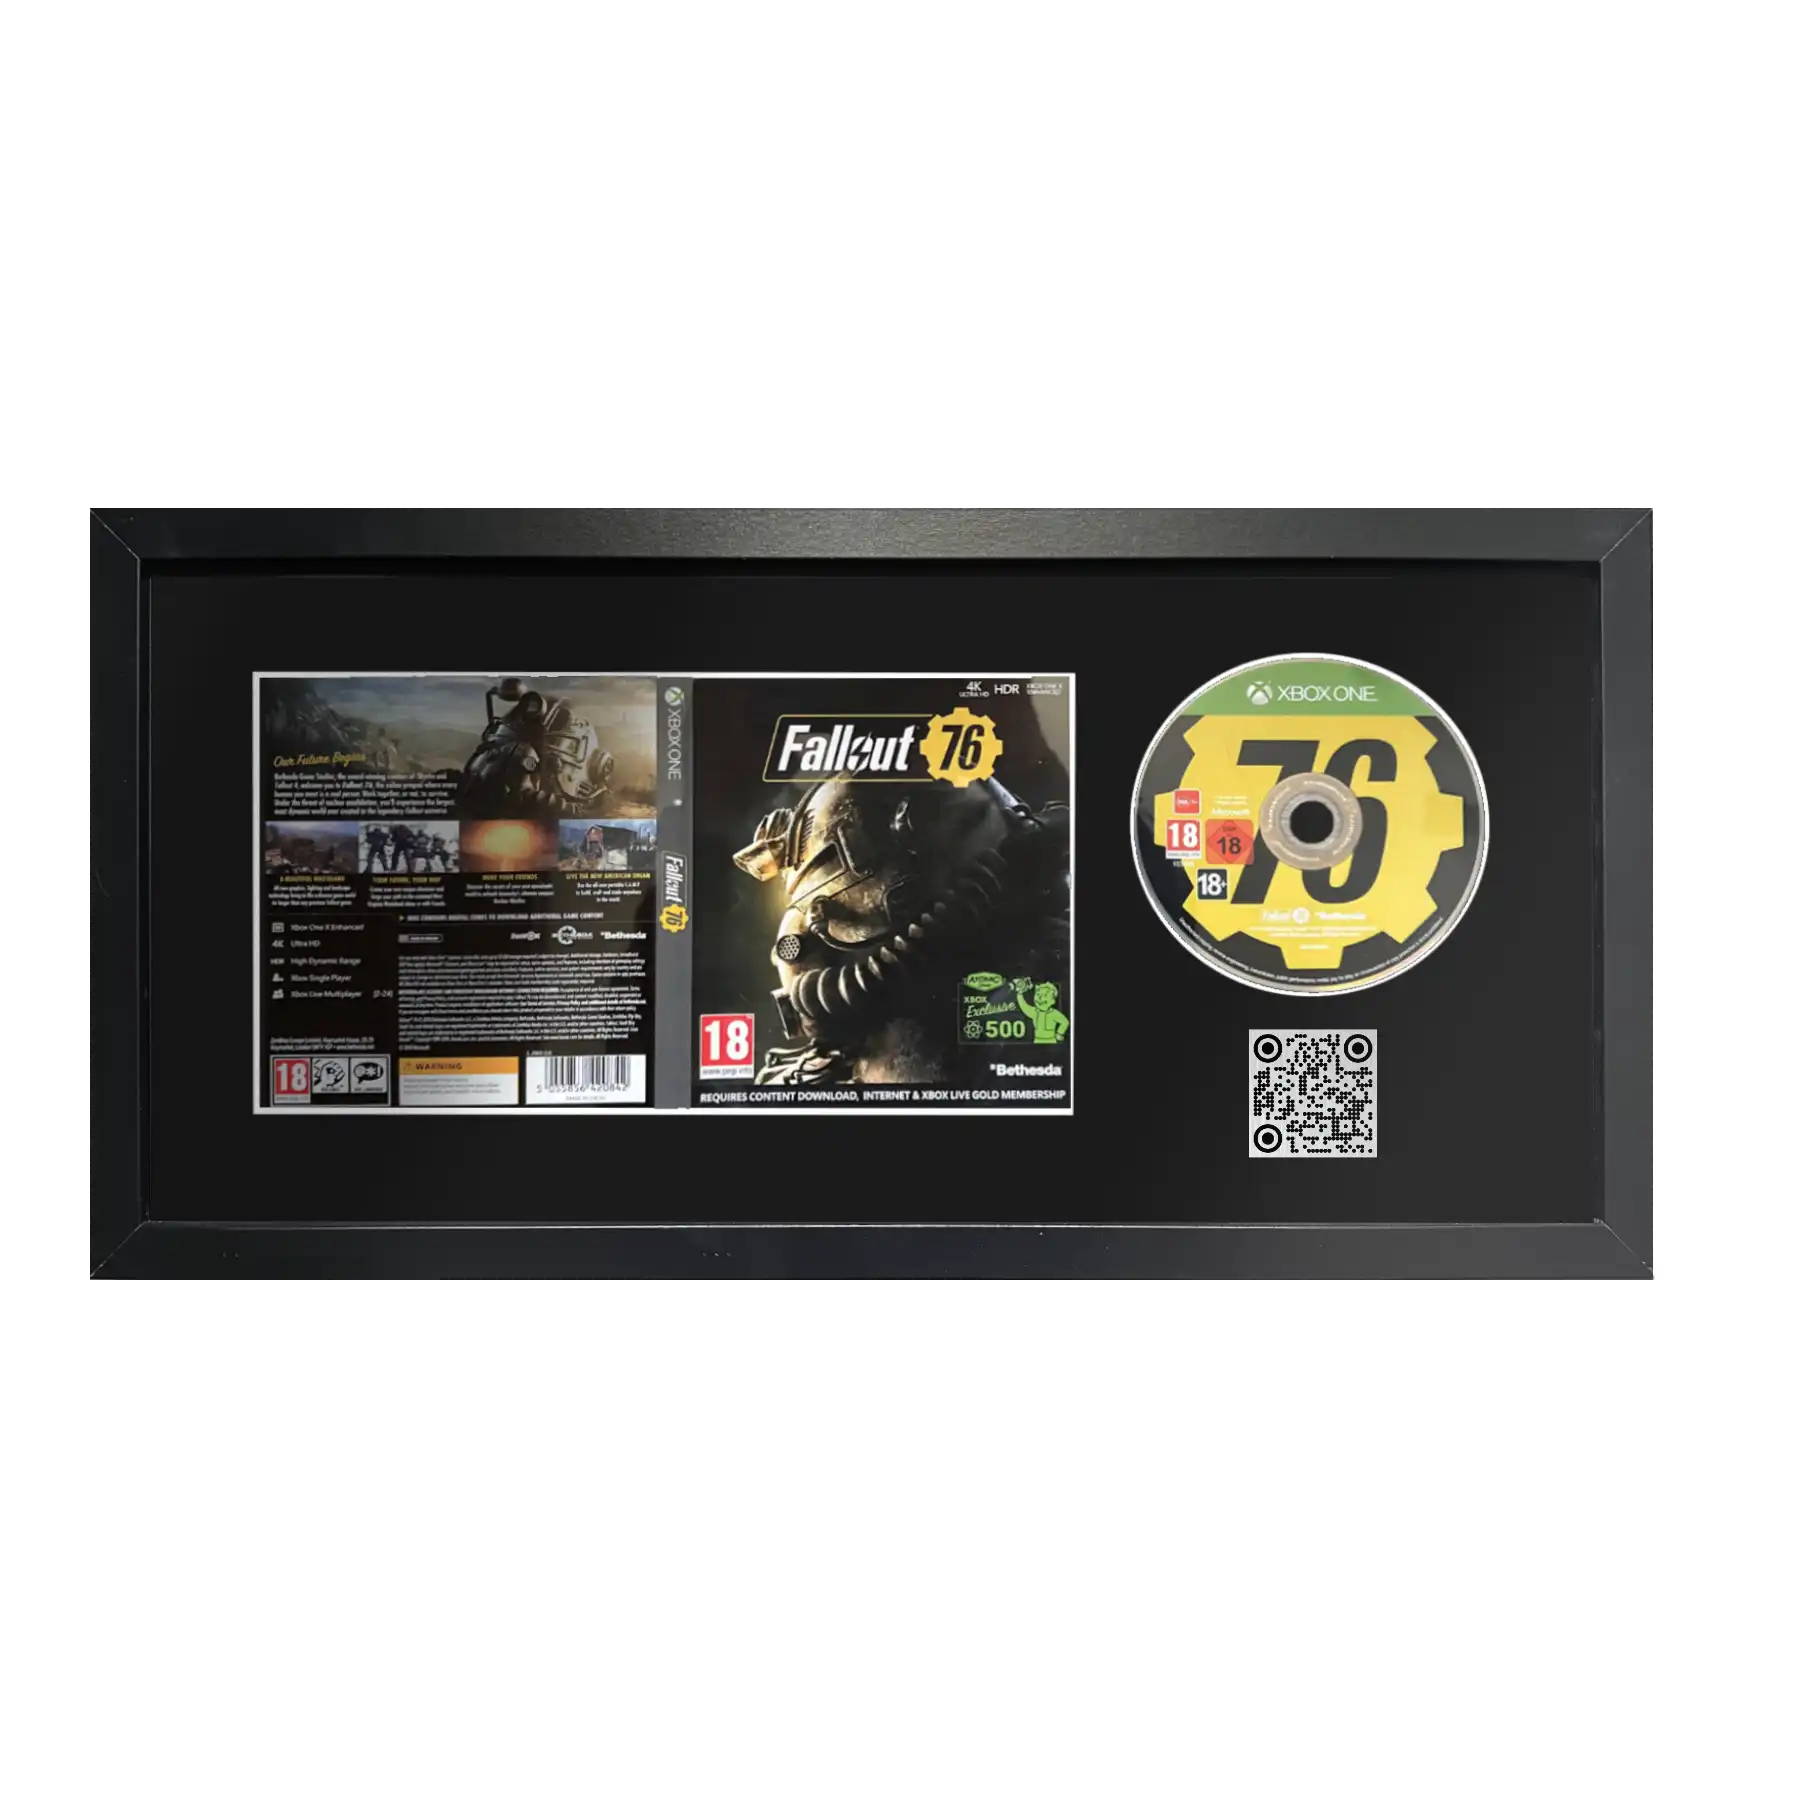 Fallout 76 game on Xbox One in a frame with a QR code